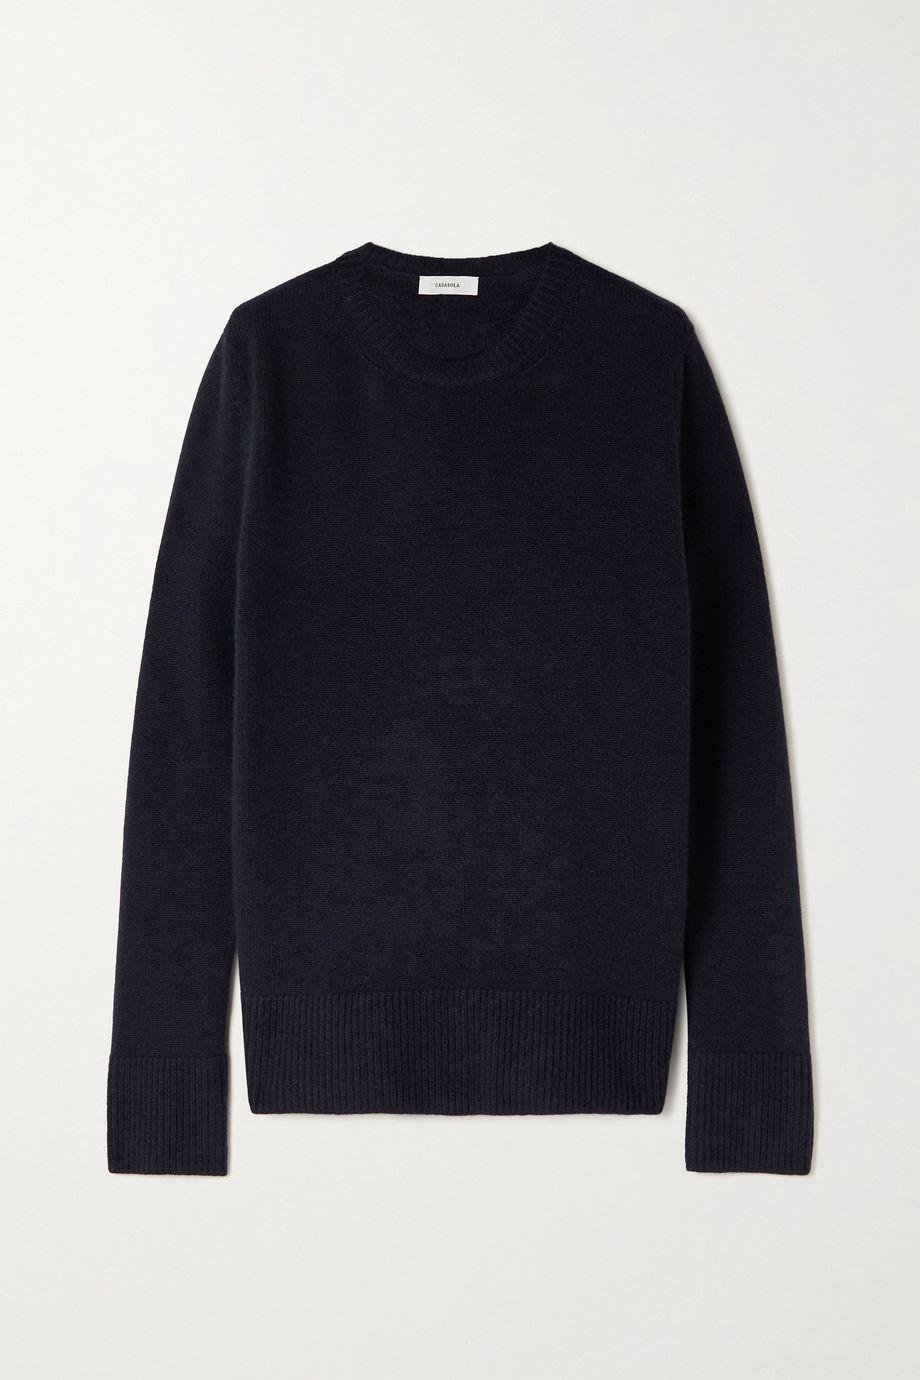 + NET SUSTAIN Maria cashmere sweater by CASASOLA